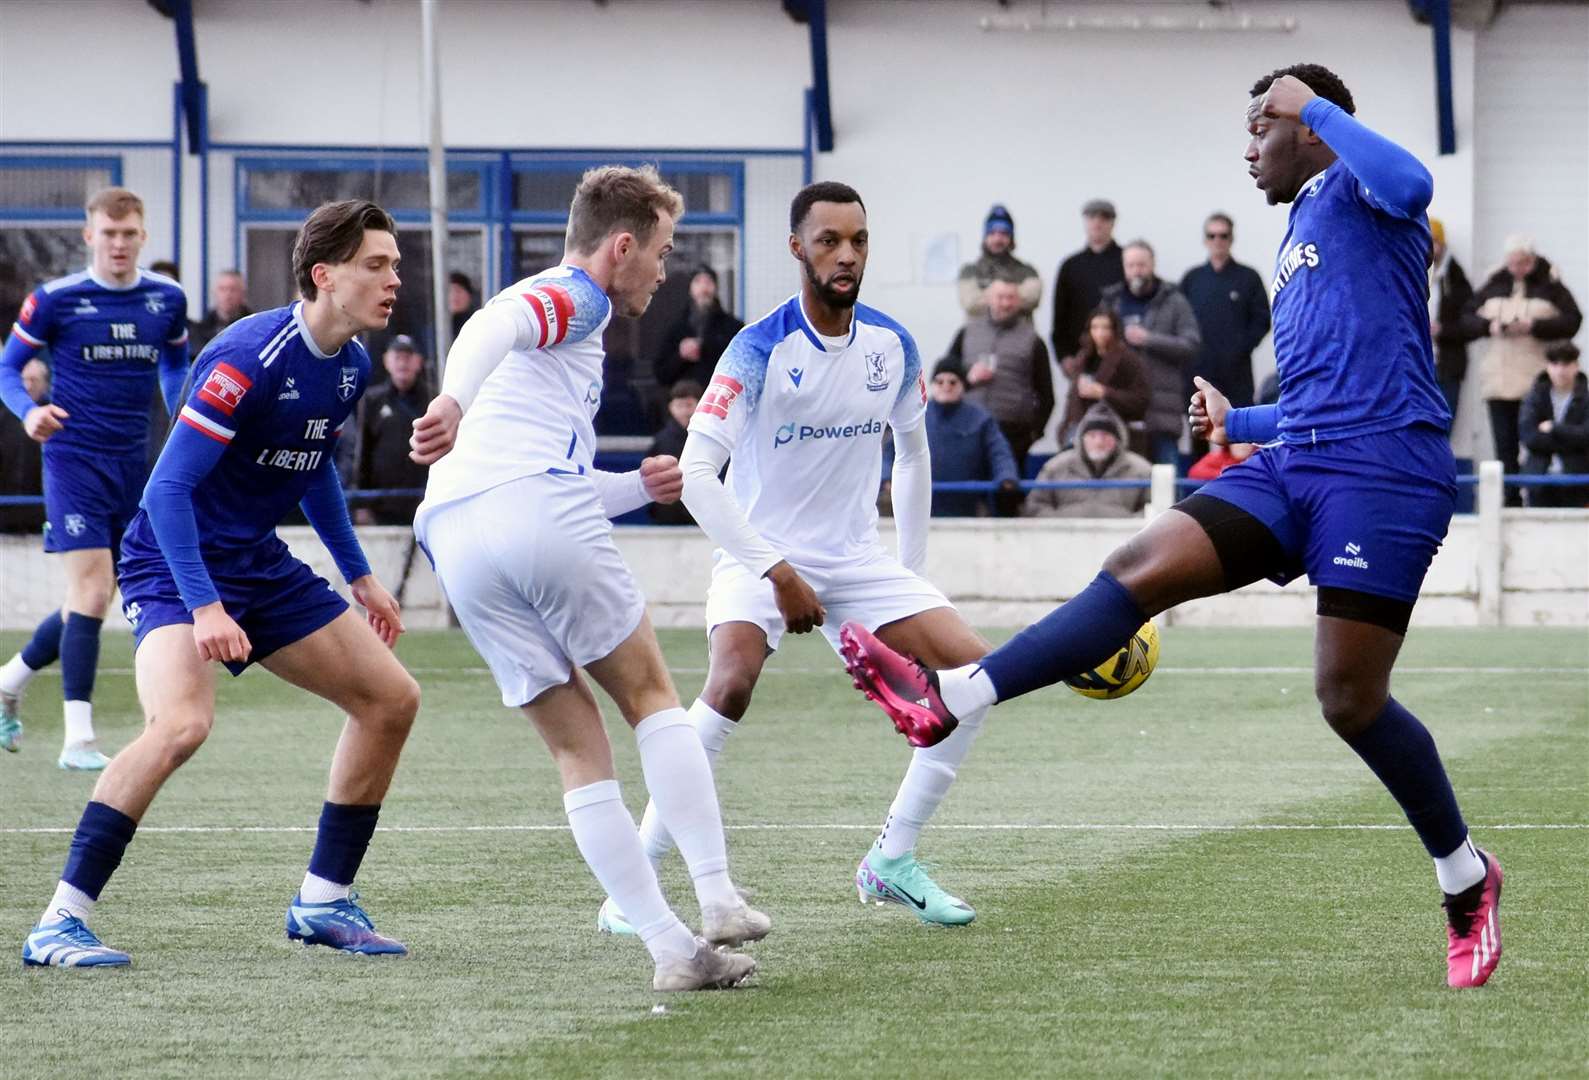 Match action between Margate and Enfield. Picture: Randolph File